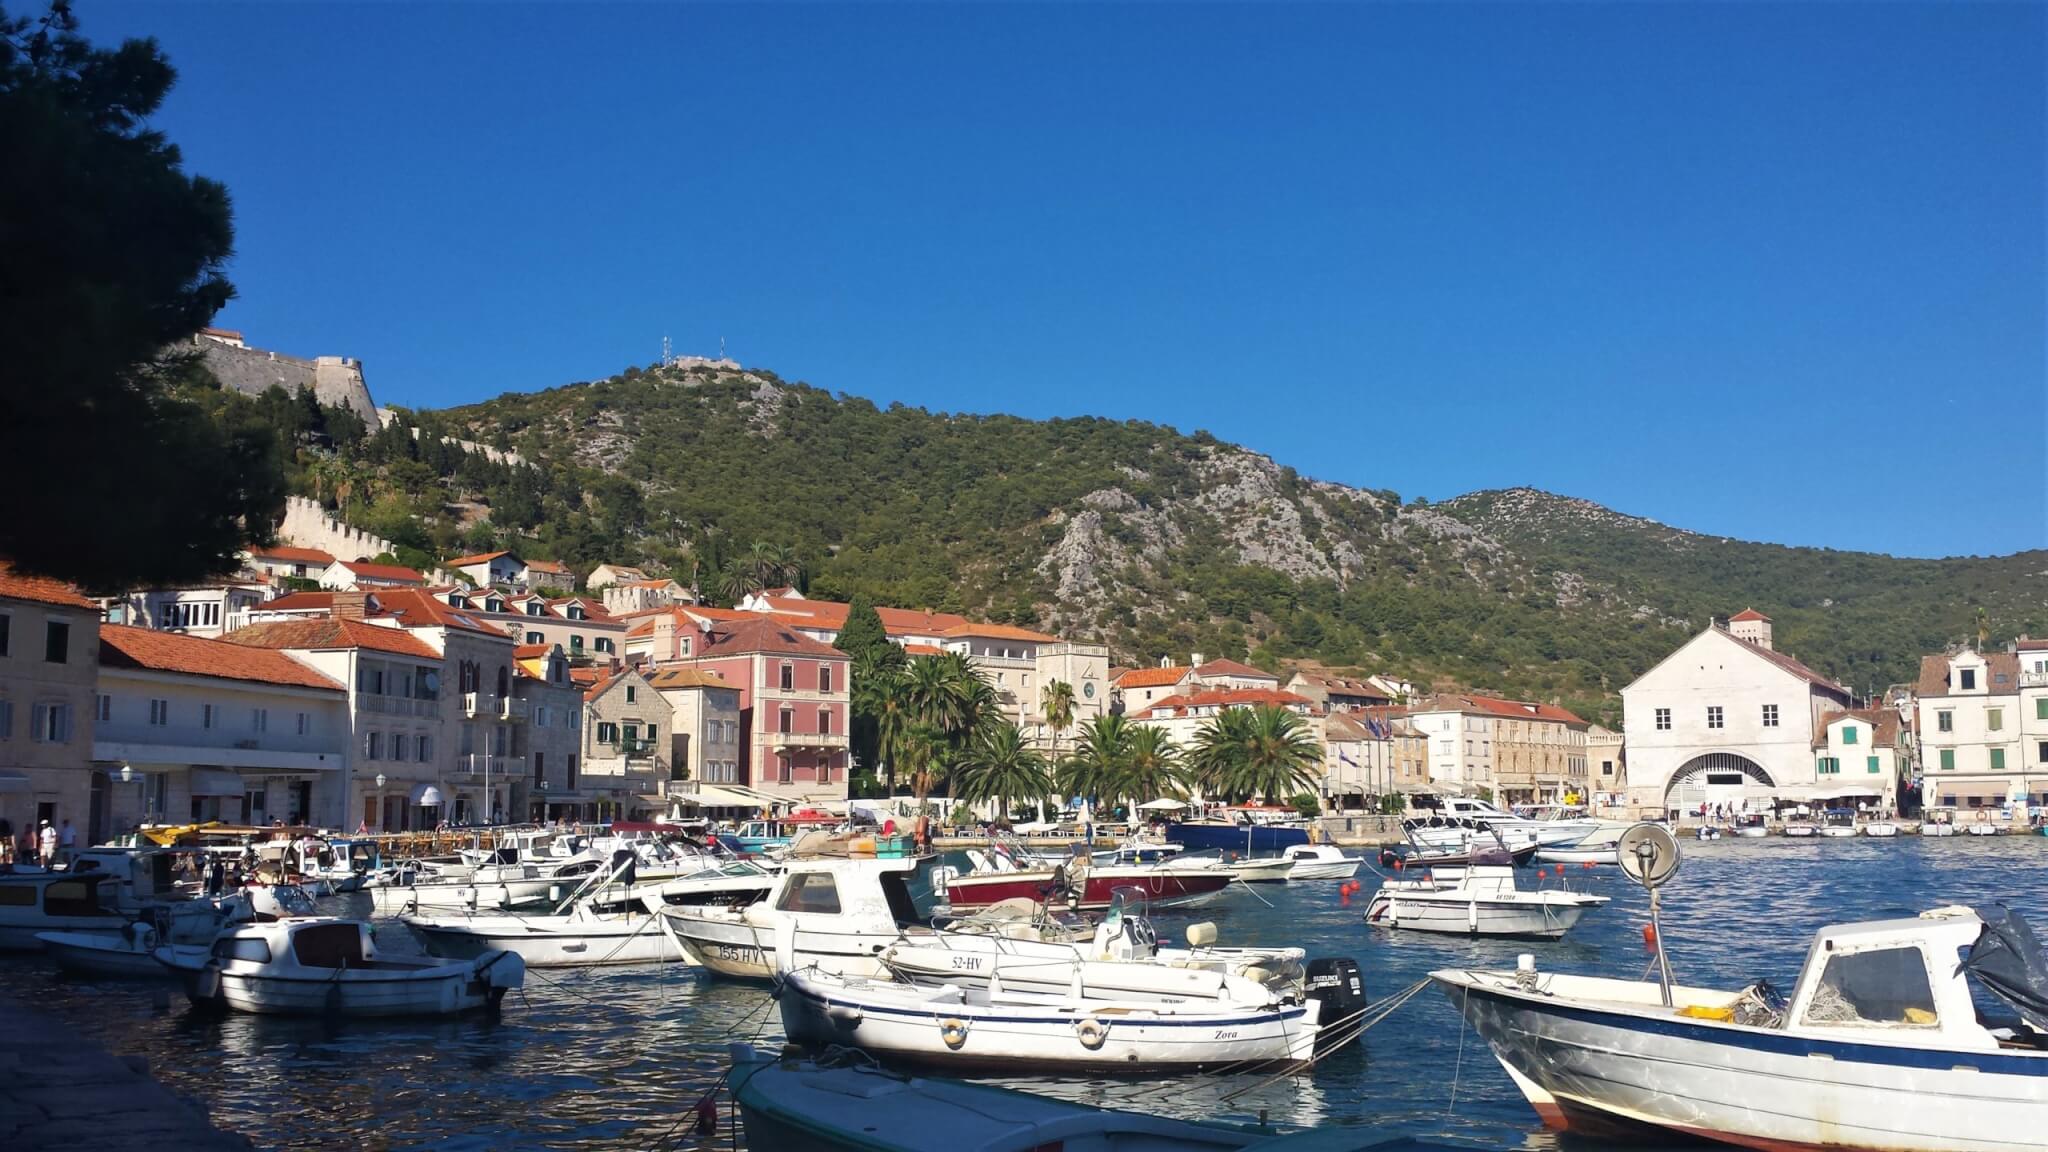 Hvar Island. Image credit to Lara from The Best Travel Gifts.